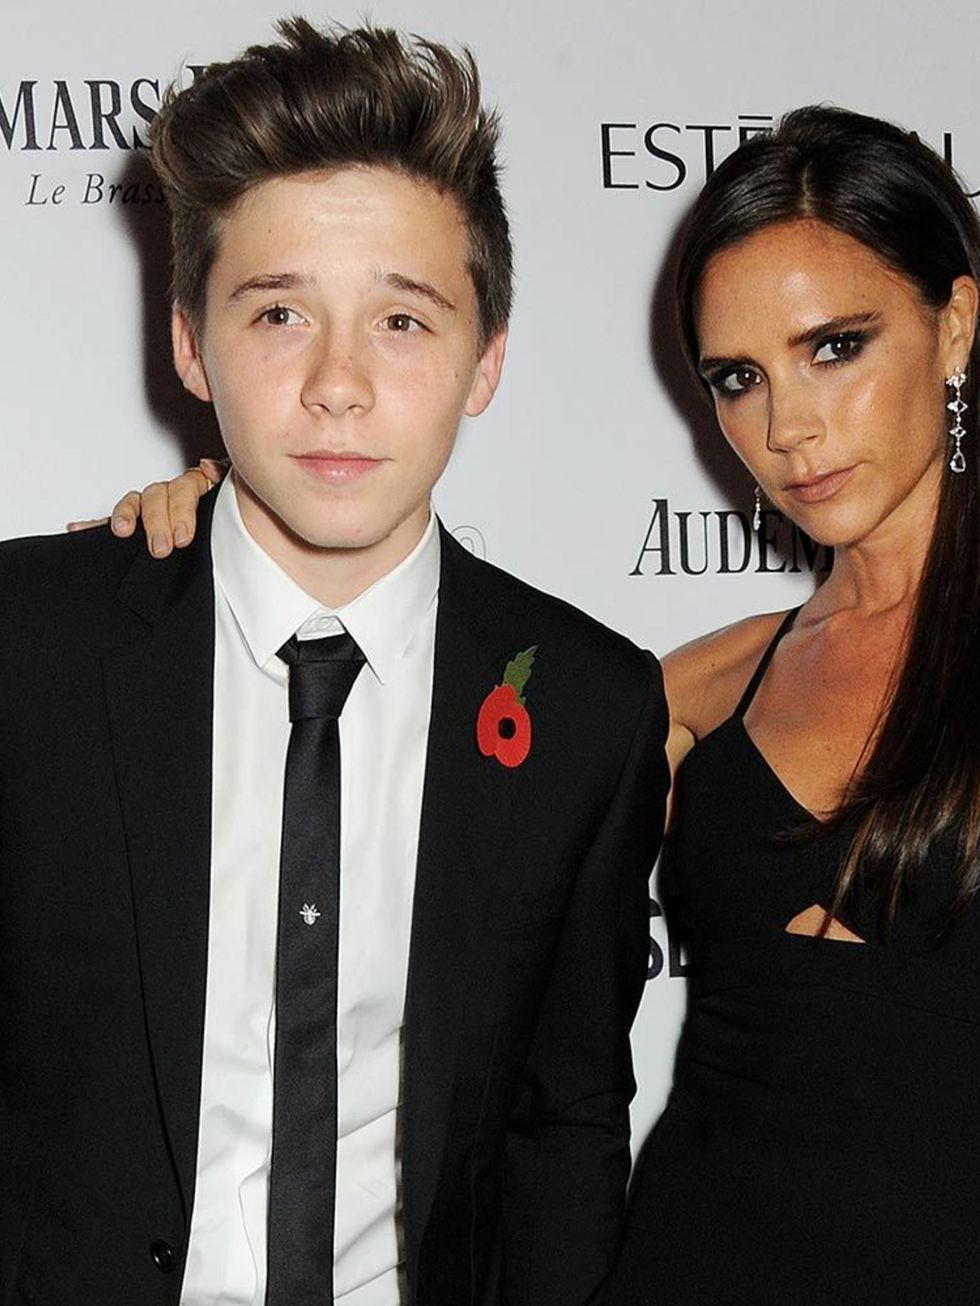 Brooklyn with his mum, Victoria, at the Harper's Bazaar Women of the Year Awards 2013